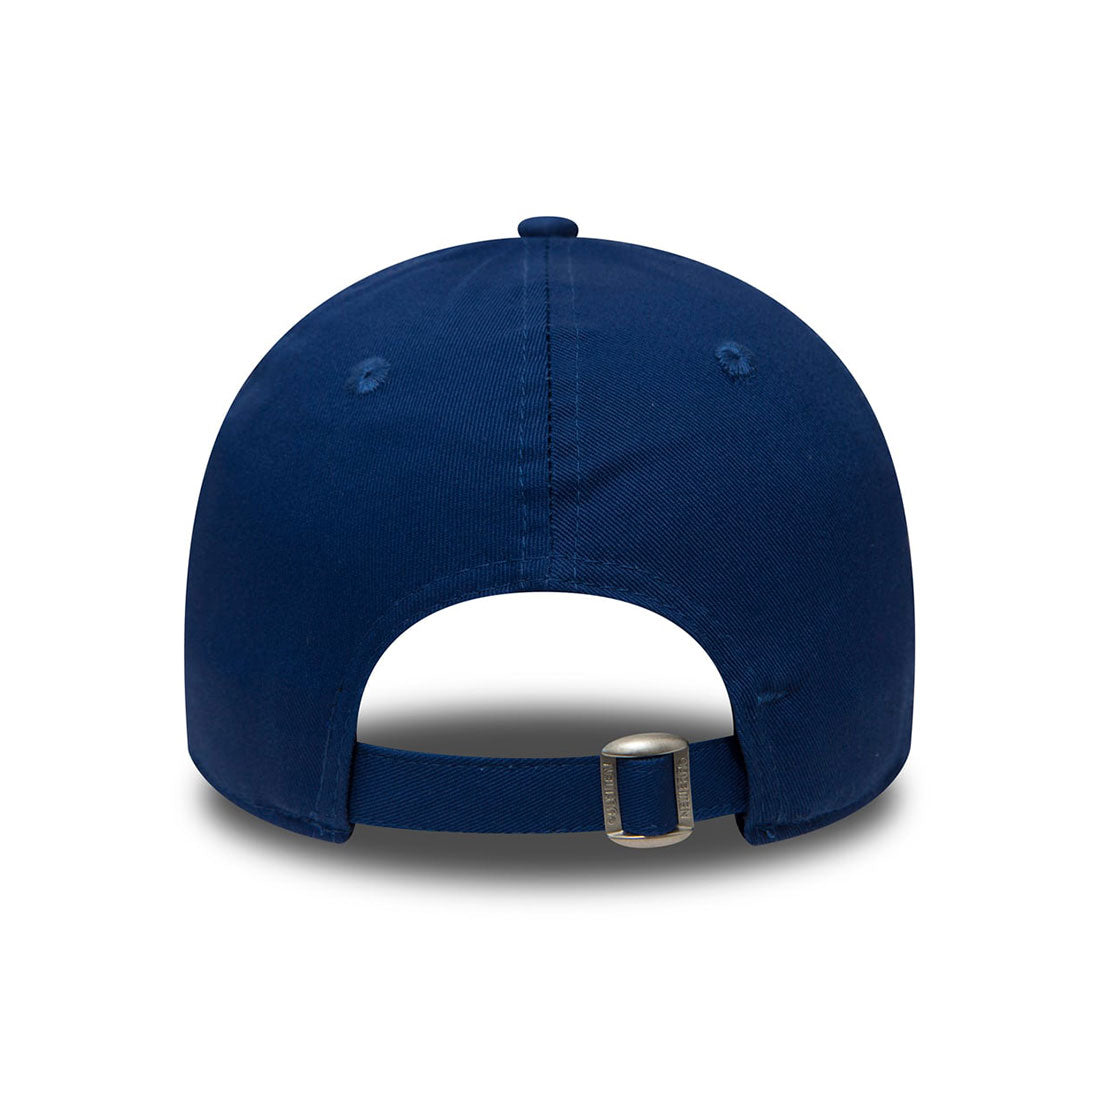 Cappellino New Era - League Essential 9Forty NY Yankees-Blu